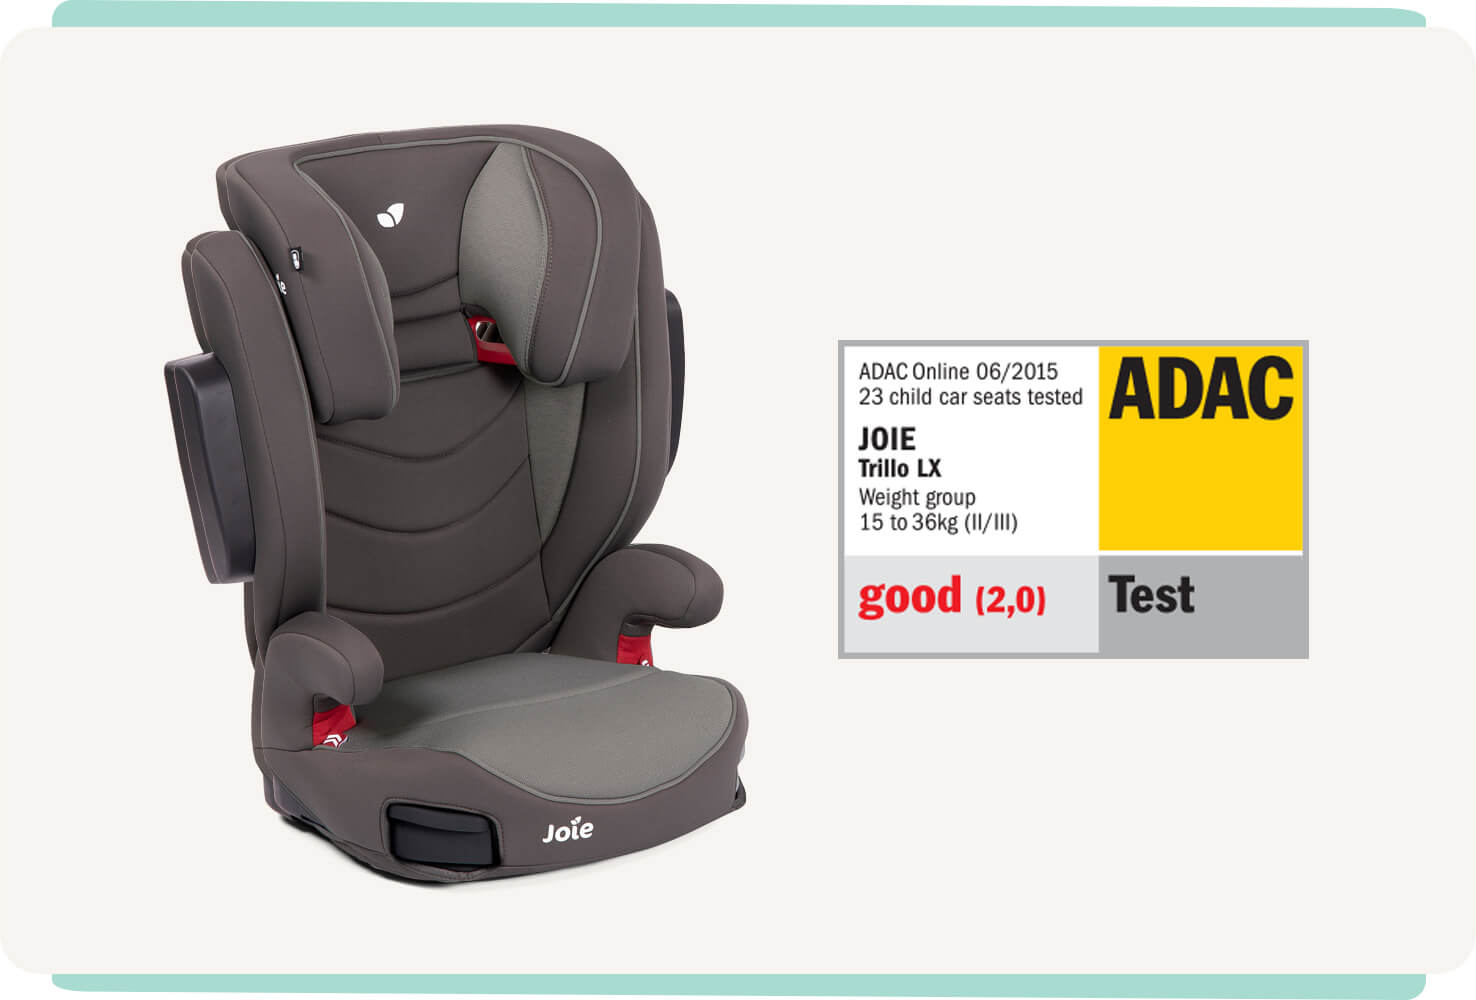  Joie trillo lx booster car seat in black positioned at a right angle. To the right of the carseat, an ADAC award is displayed explaining the merit this seat has achieved.